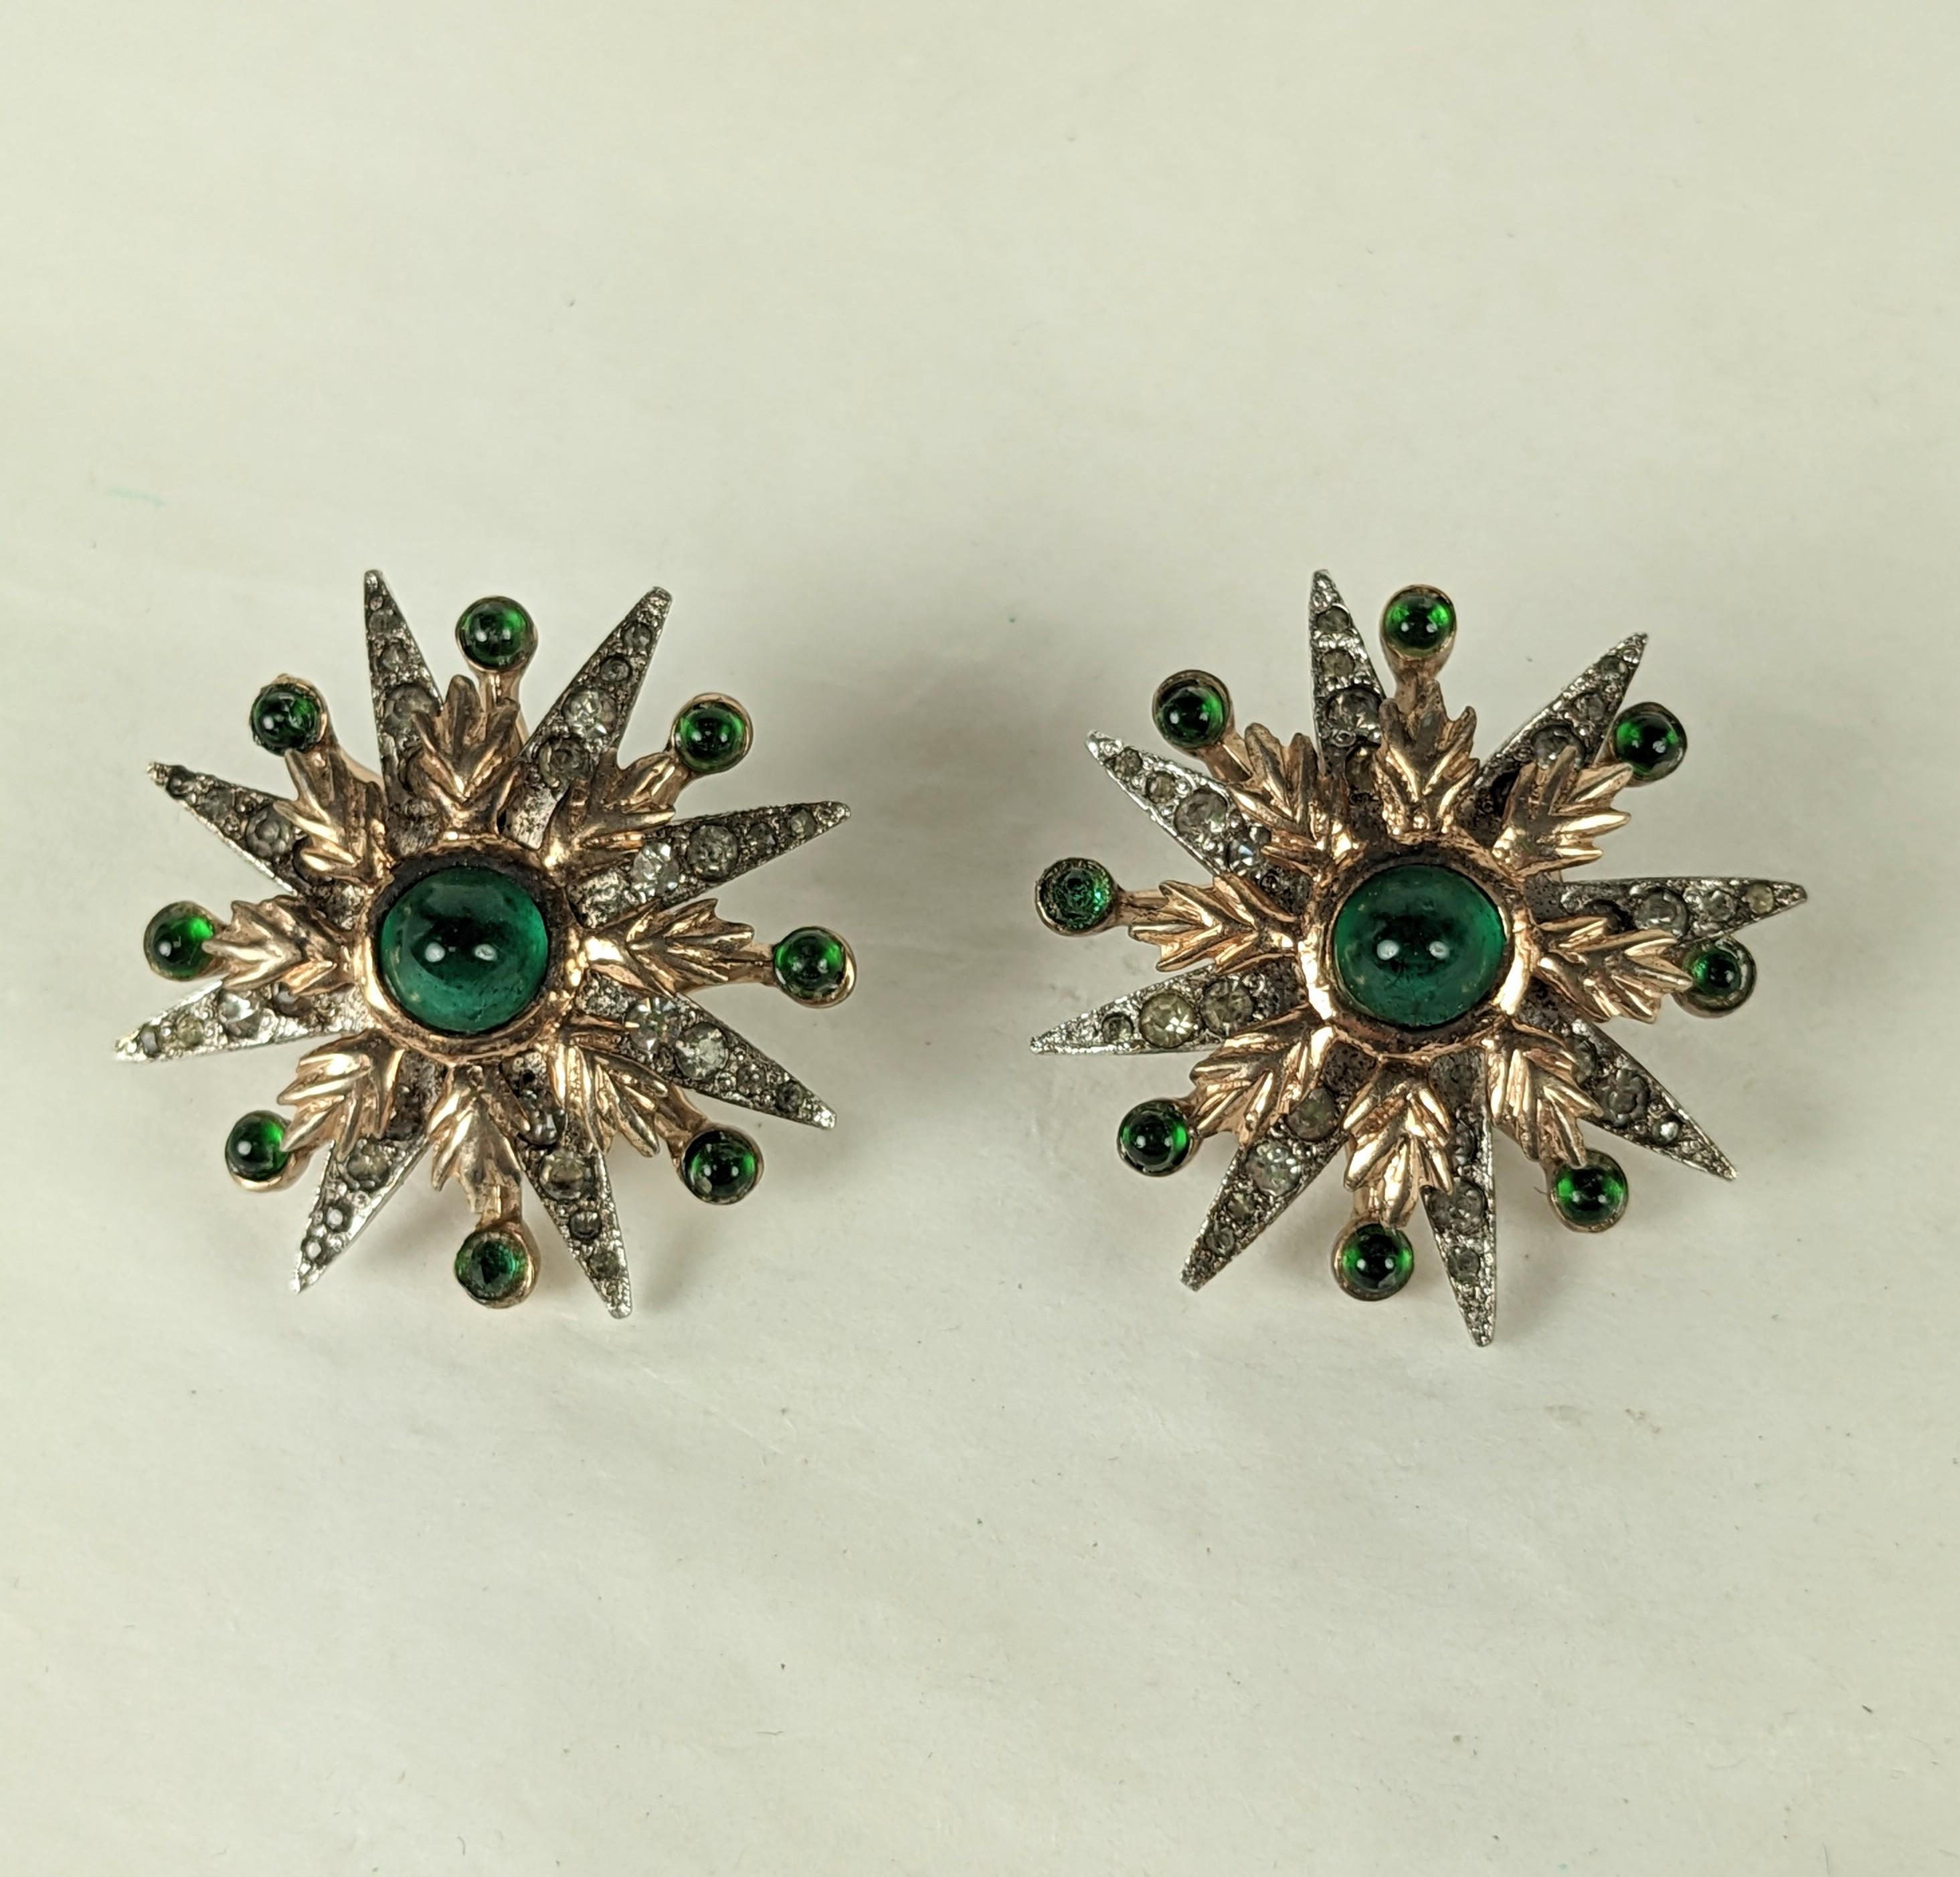 Nettie Rosenstein Starbust Earrings in sterling rose vermeil 2 toned finish with green glass cabochons. Clip back fittings. 1.25